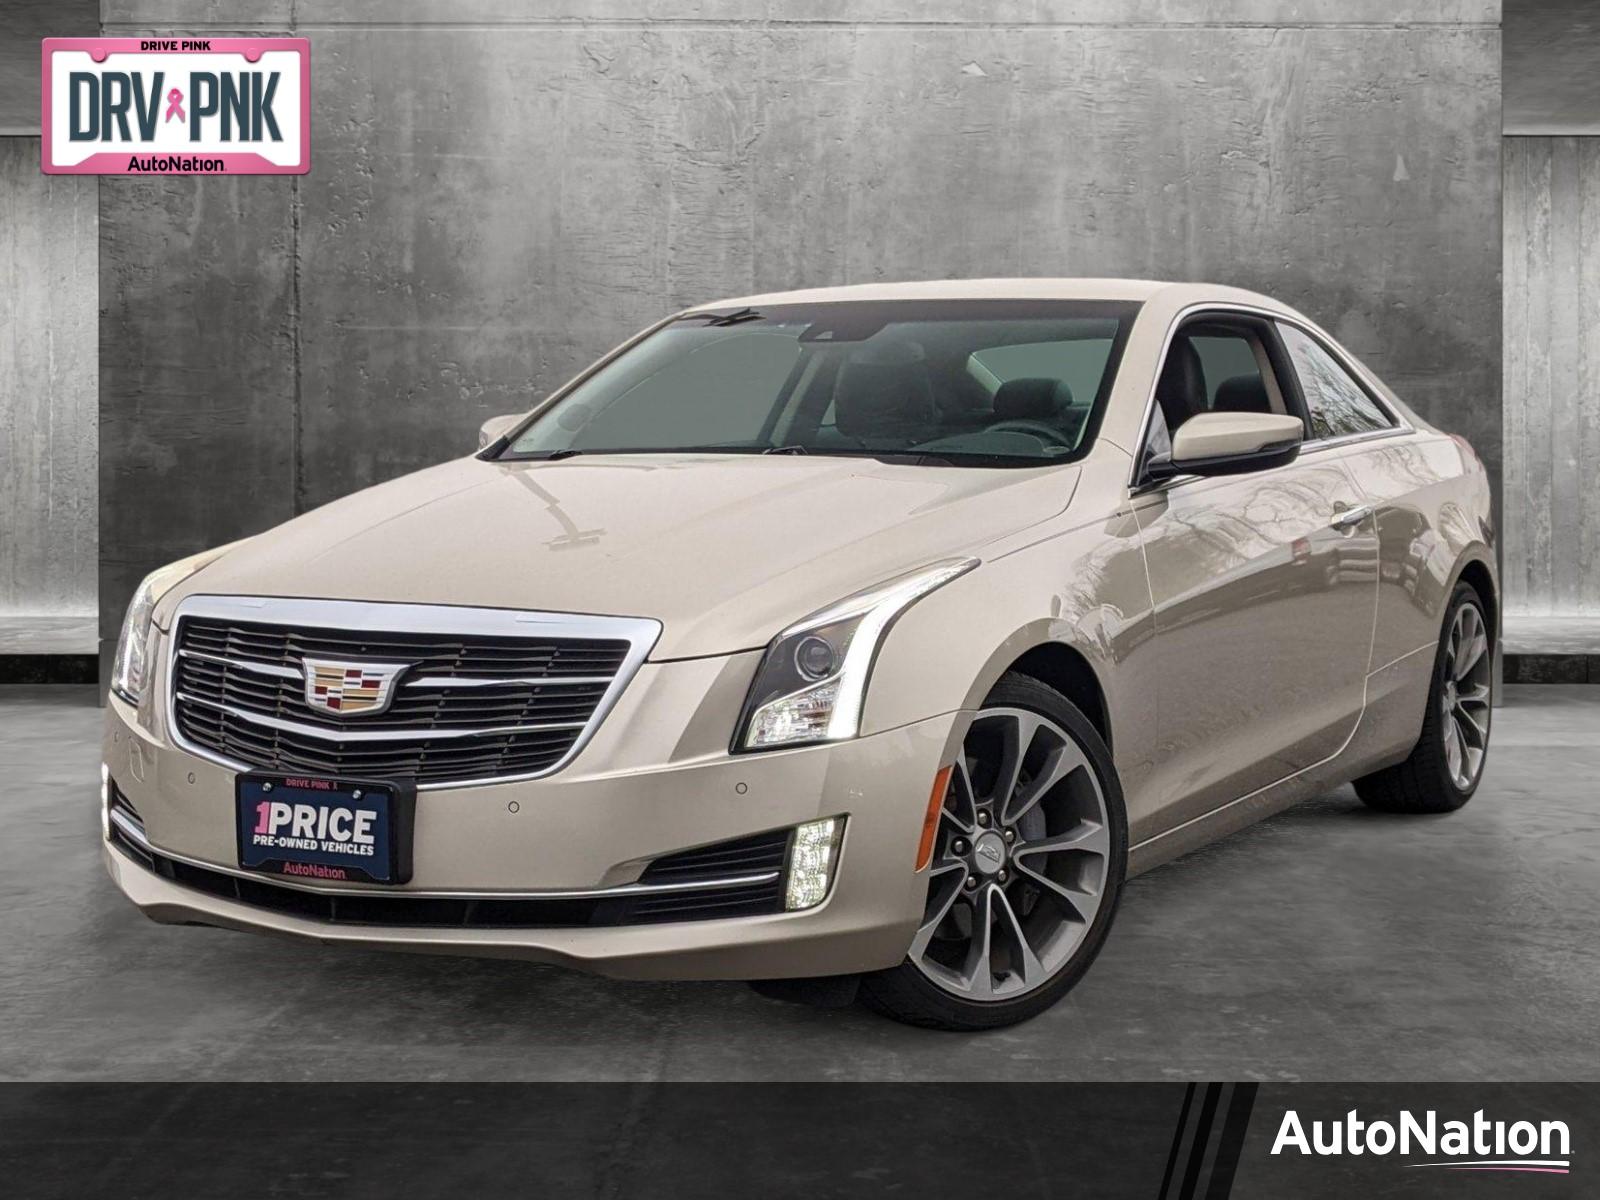 2016 Cadillac ATS Coupe Vehicle Photo in TIMONIUM, MD 21093-2300